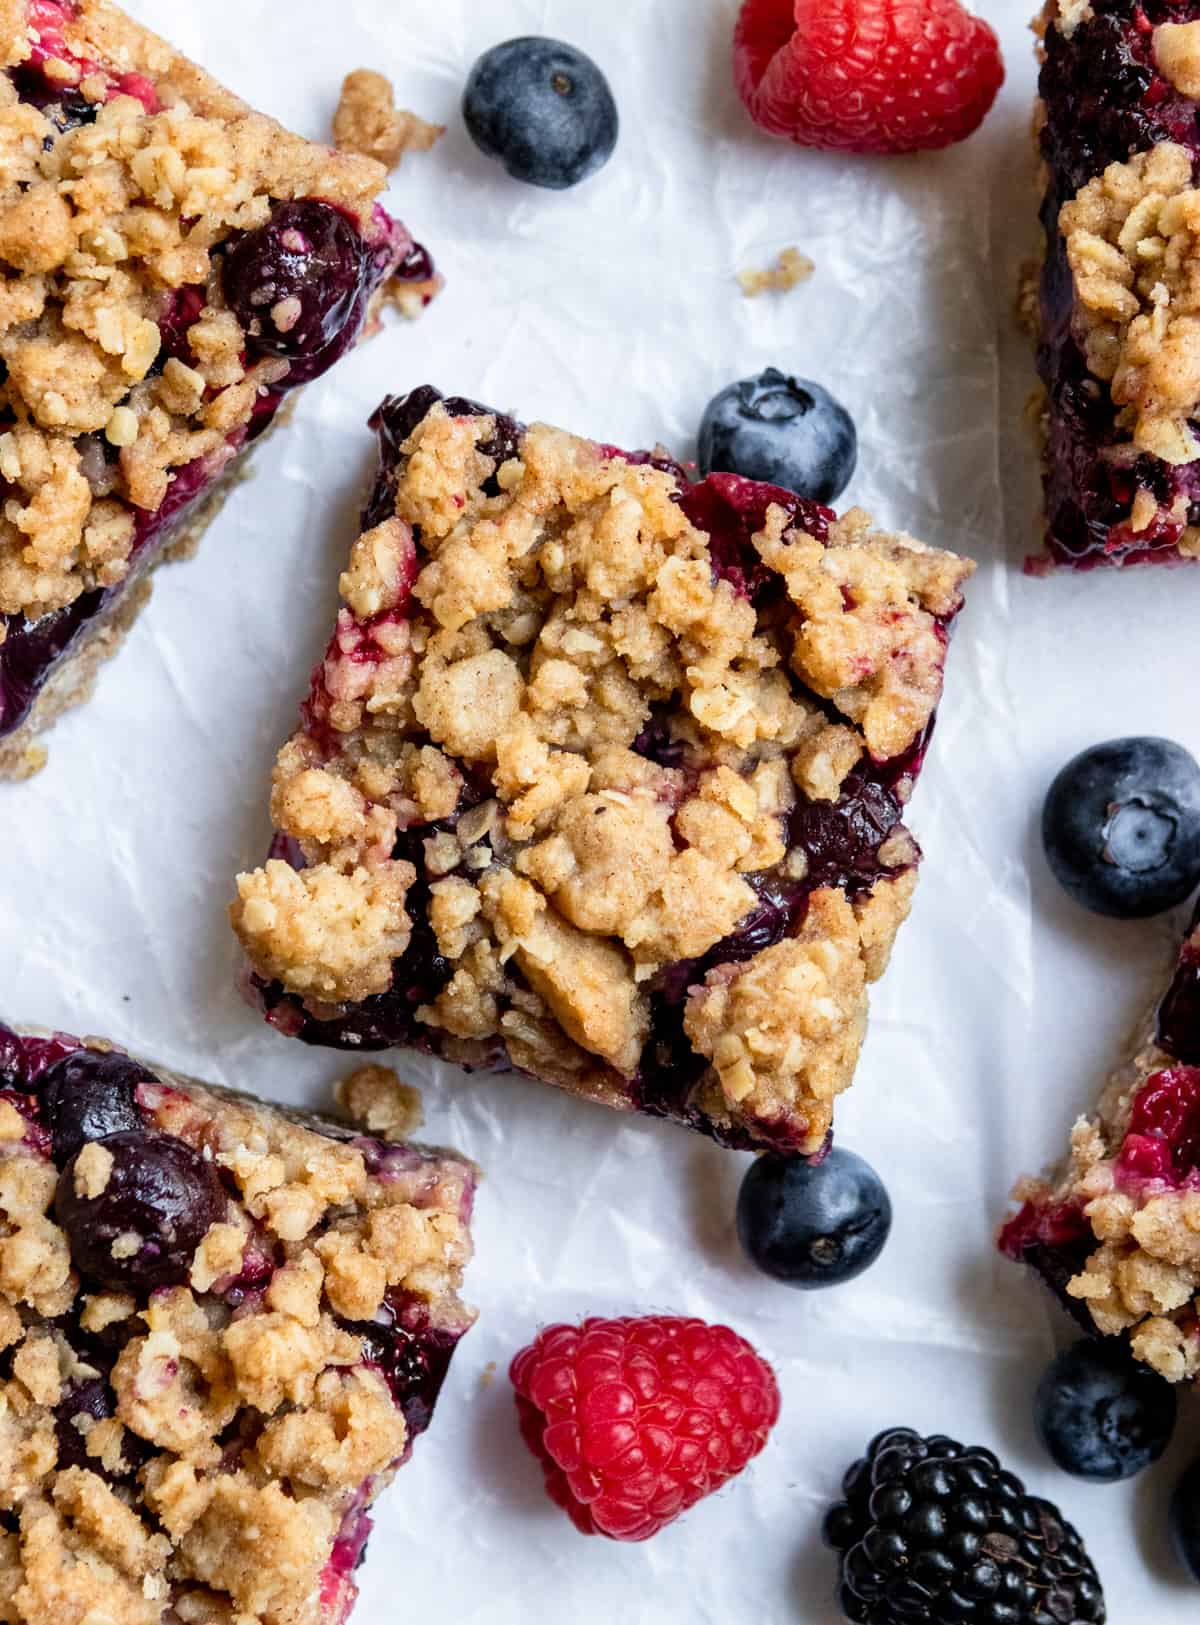 Mixed berry oat bars with crumble topping and fresh berries.